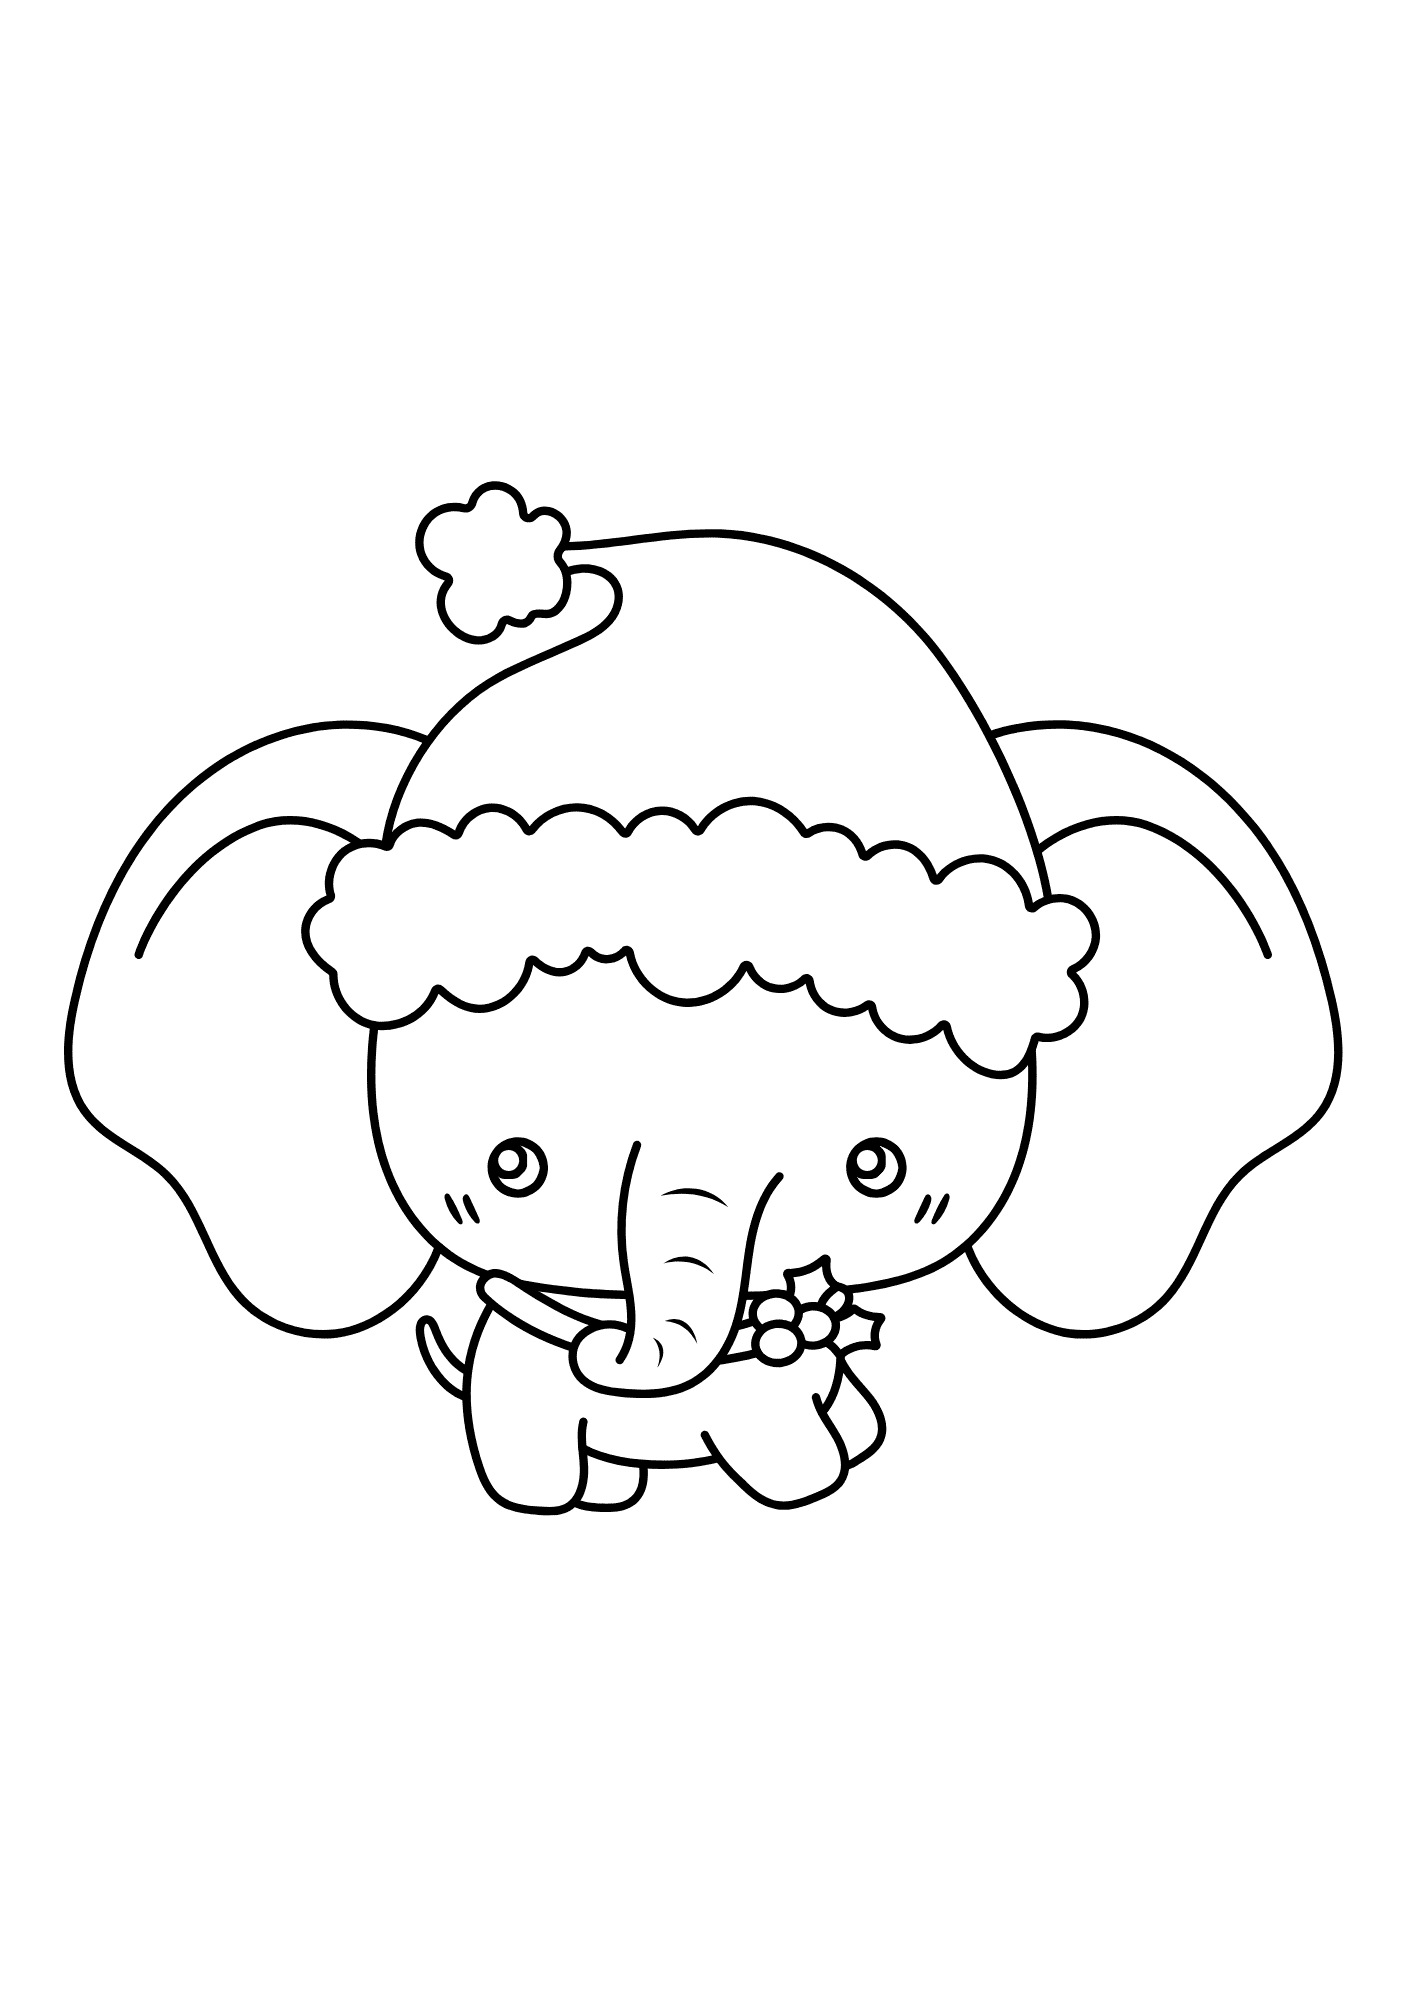 Elephant Merry Christmas Coloring Page